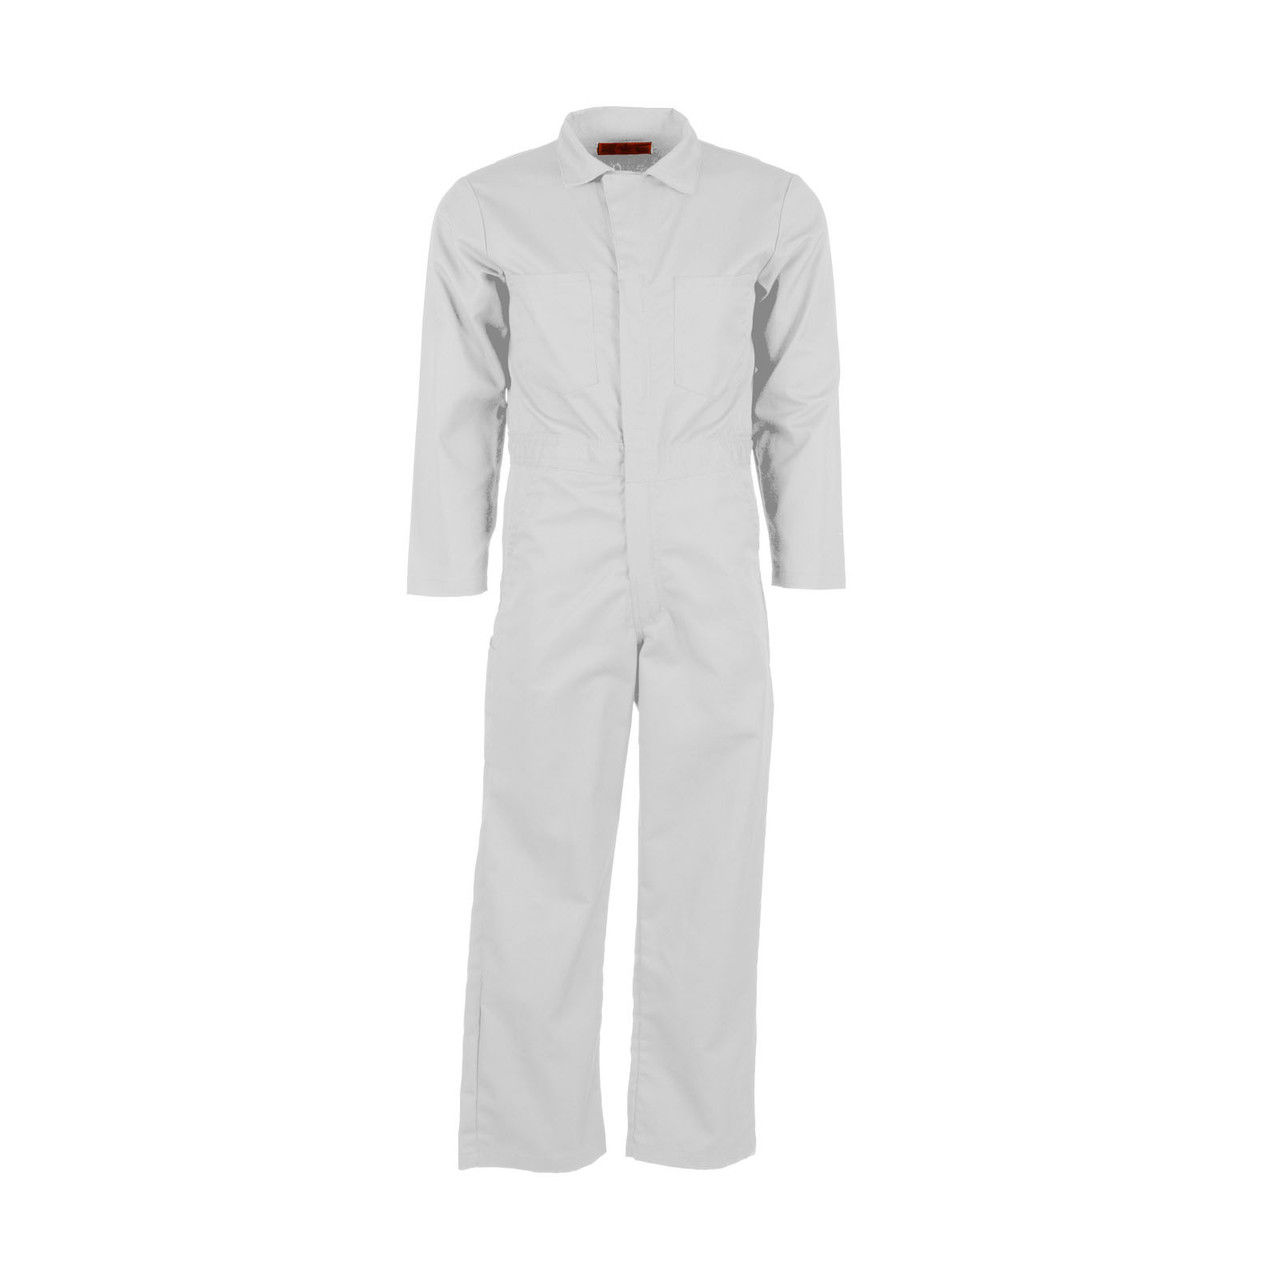 What is the estimated shipping time for the white coveralls CV10WH by Pinnacle Textile?